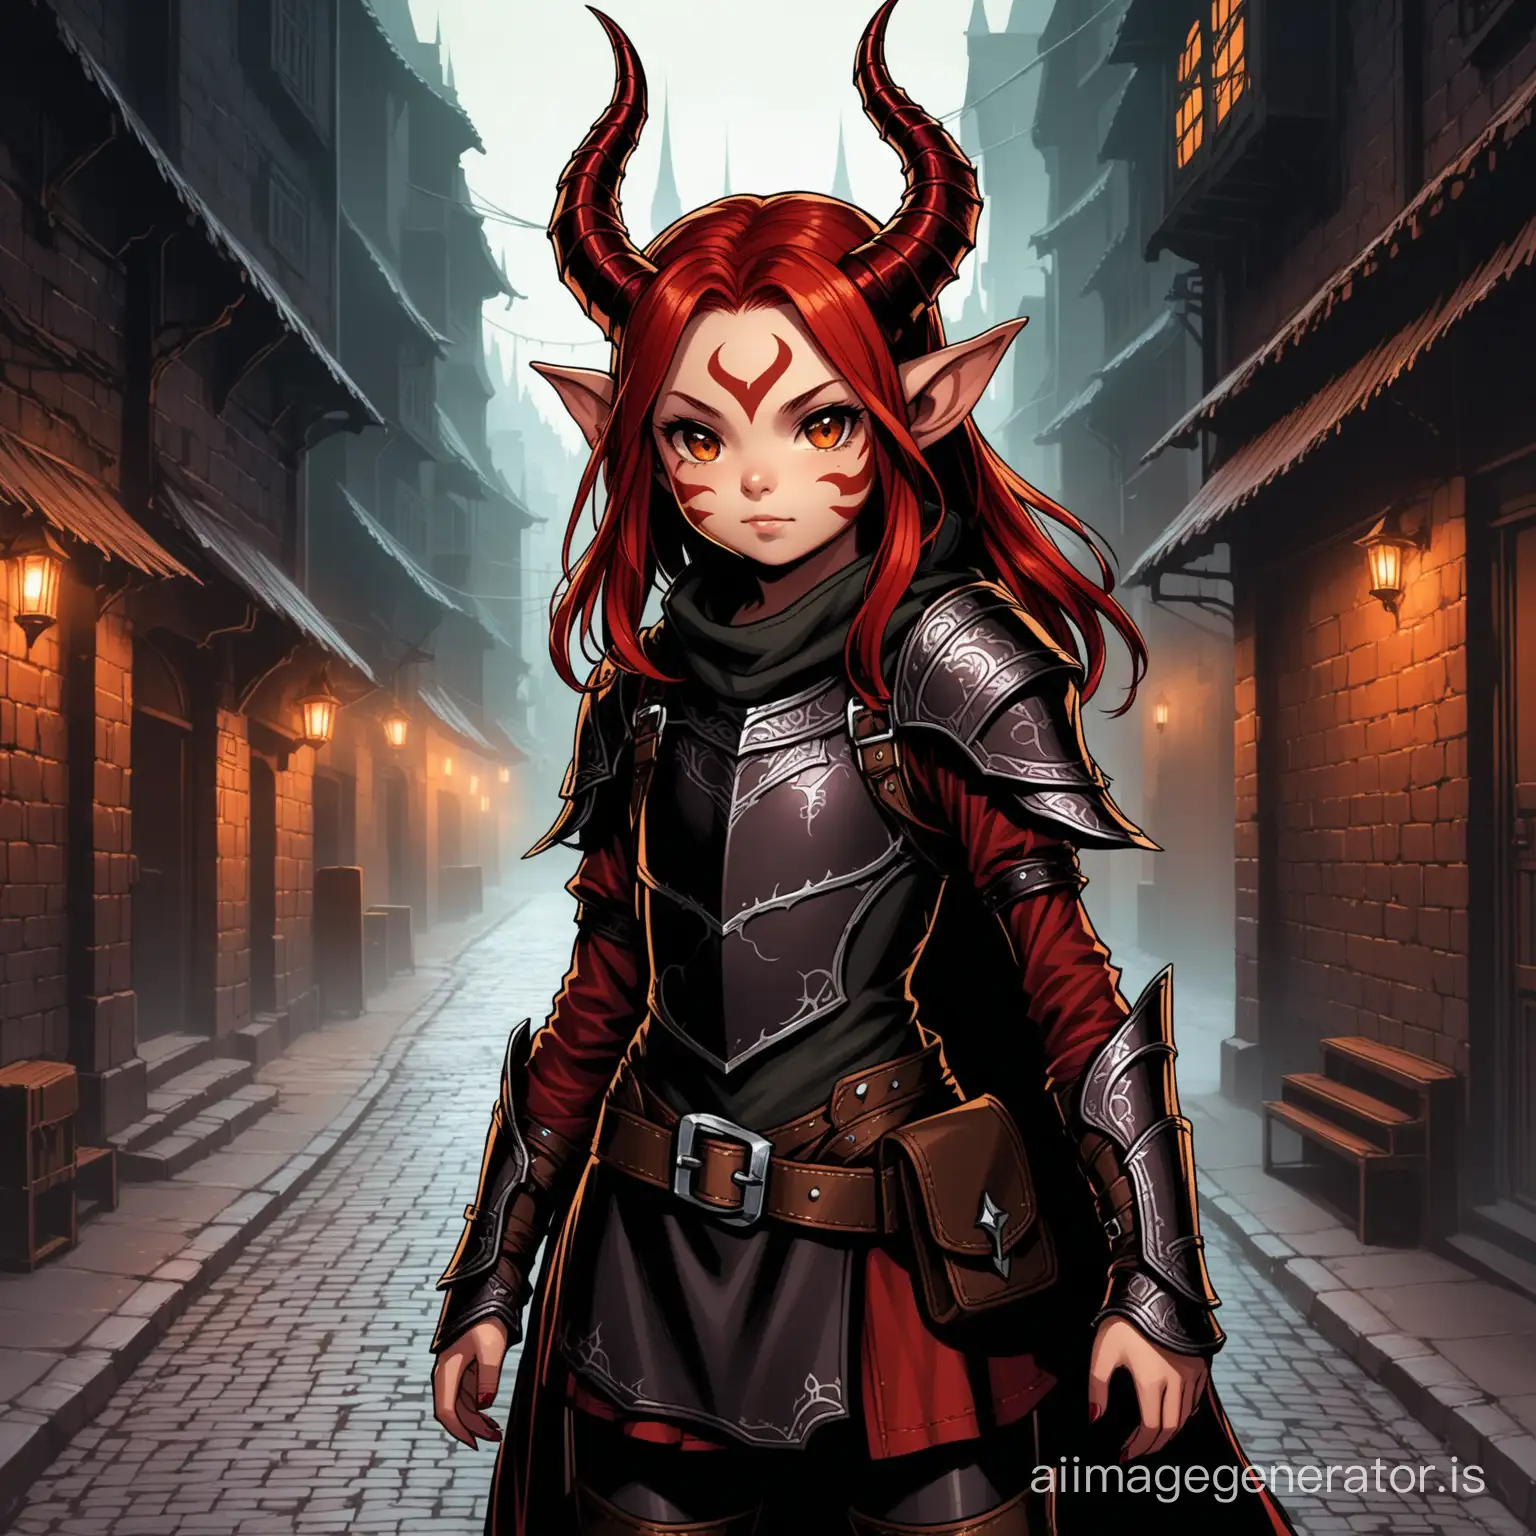 Young-Tiefling-Rogue-Girl-in-Dark-Cityscape